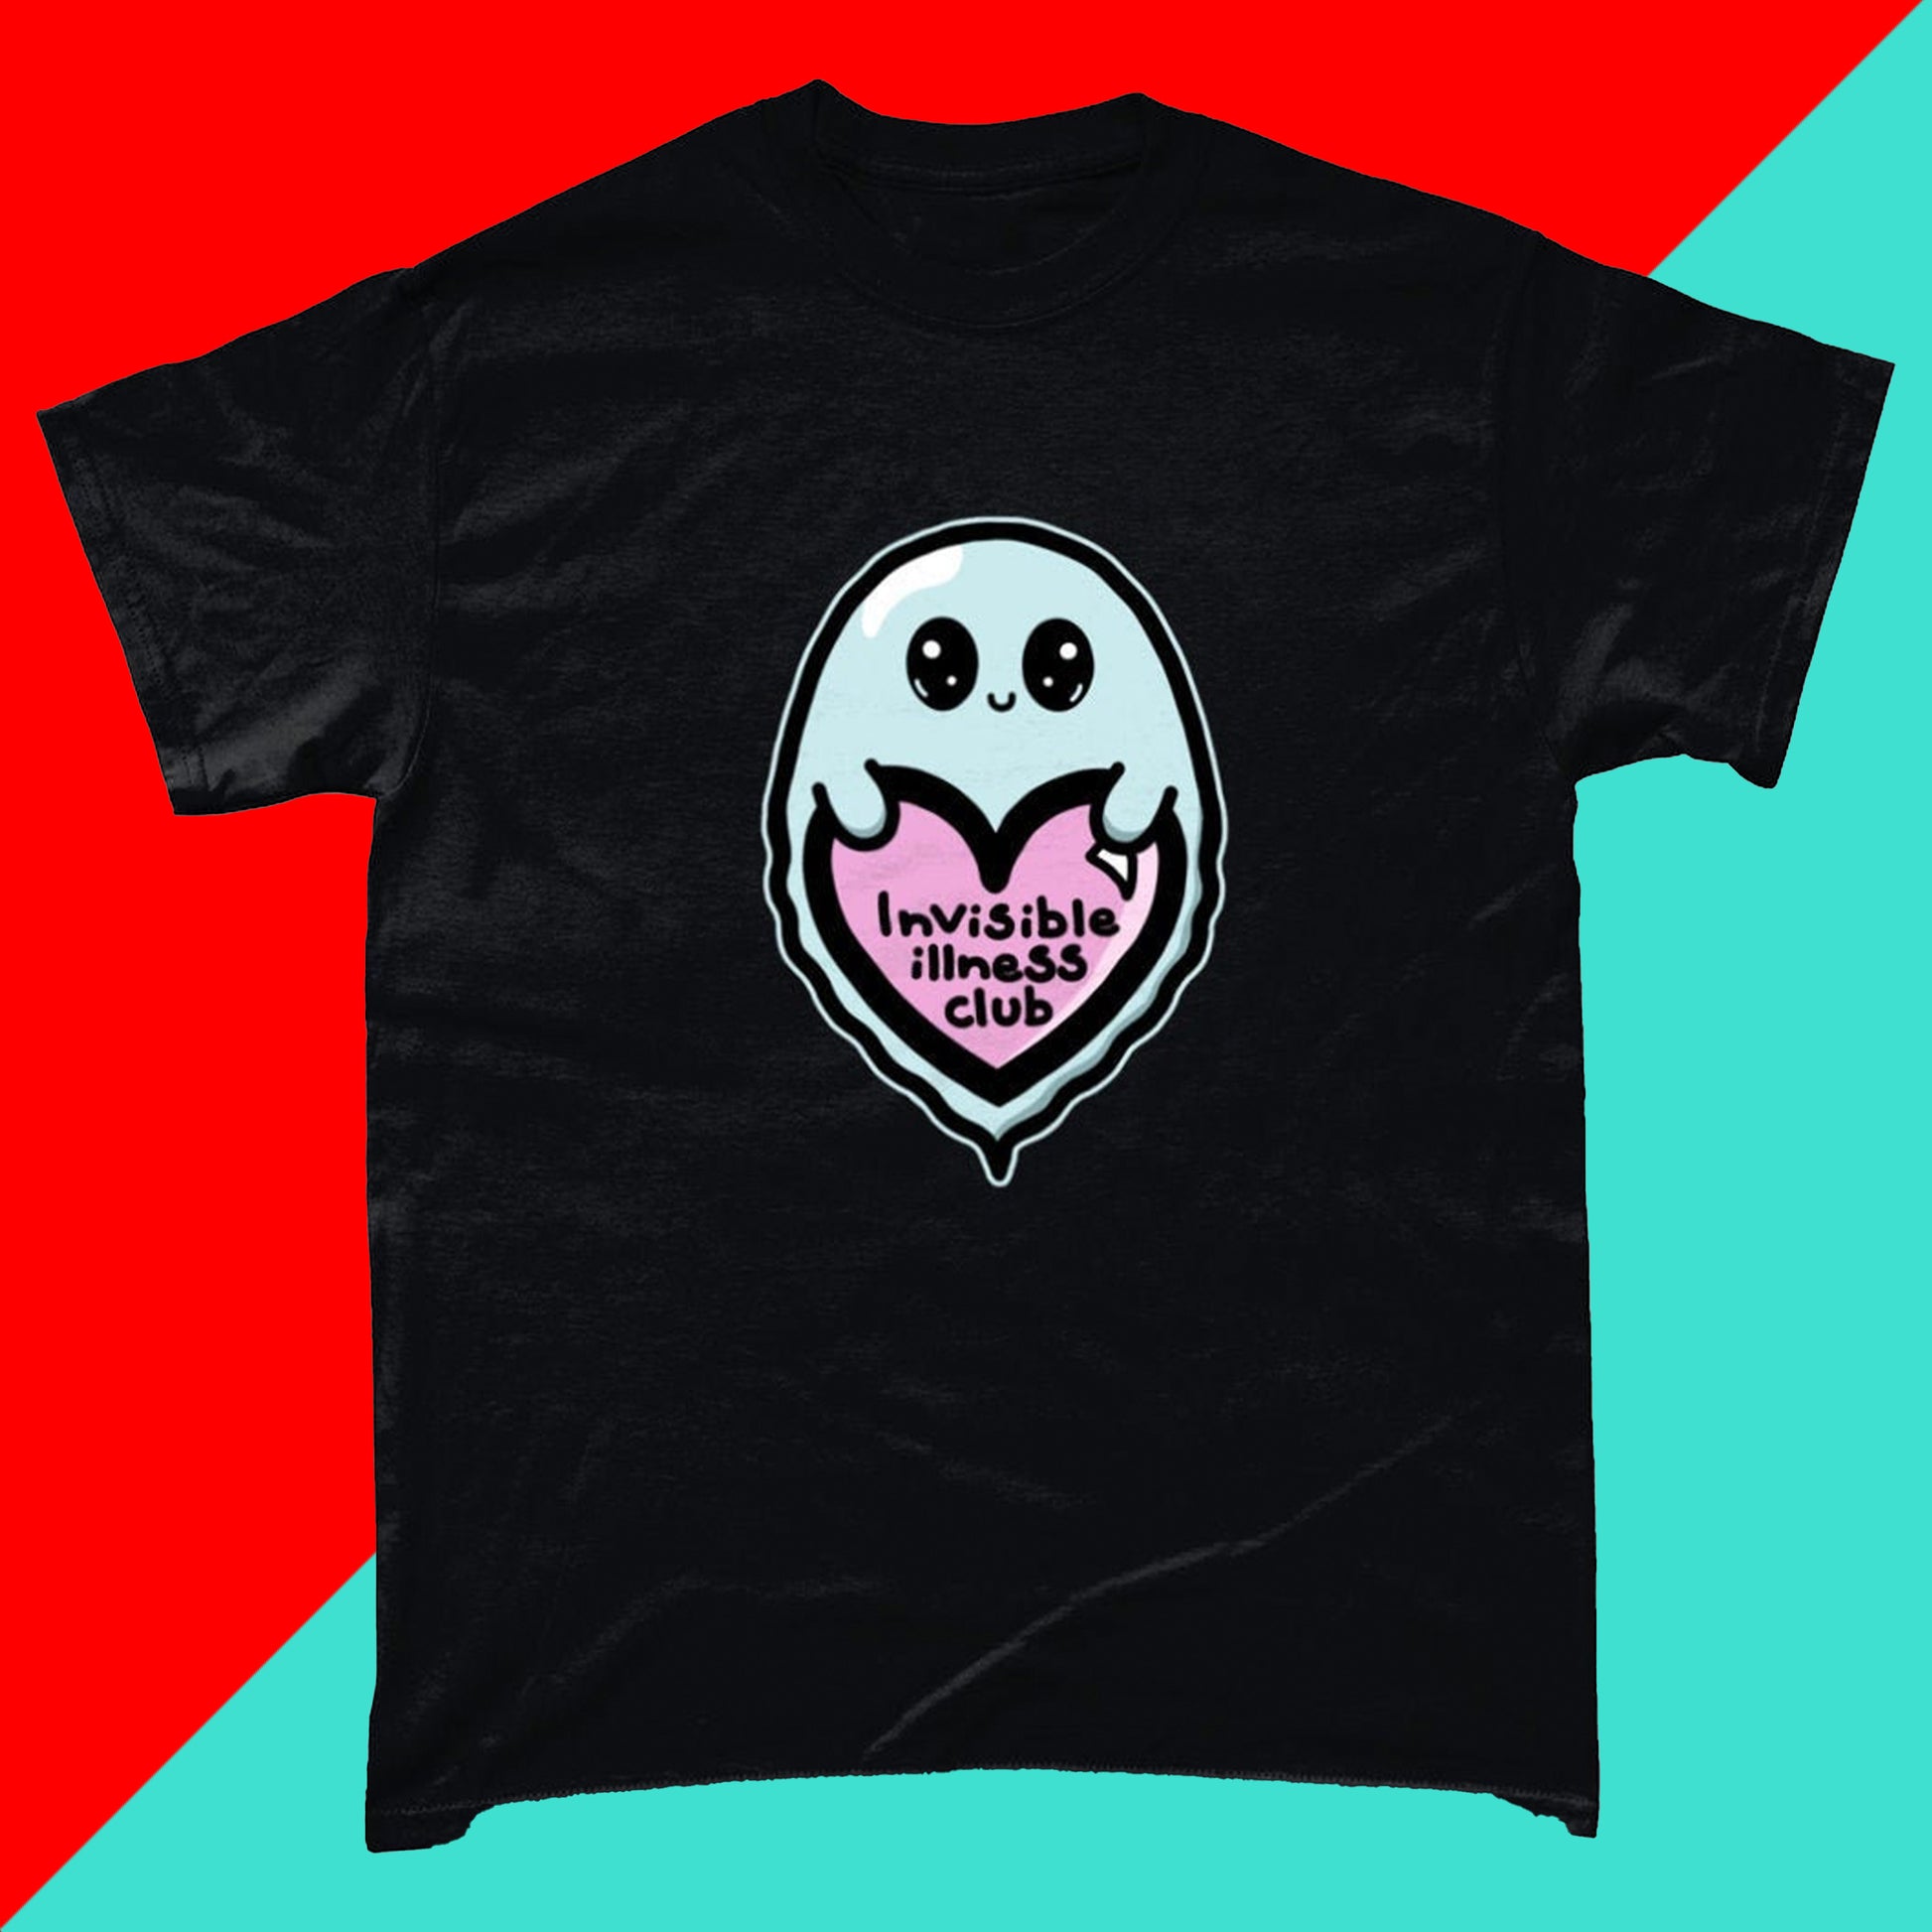 The Invisible Illness Club Black Tee on a blue and red background. The black short sleeve tshirt has a pastel blue smiling ghost with big sparkly eyes holding up a pastel pink heart with black text reading 'invisible illness club'. The hand drawn design is raising awareness for hidden disabilities. 